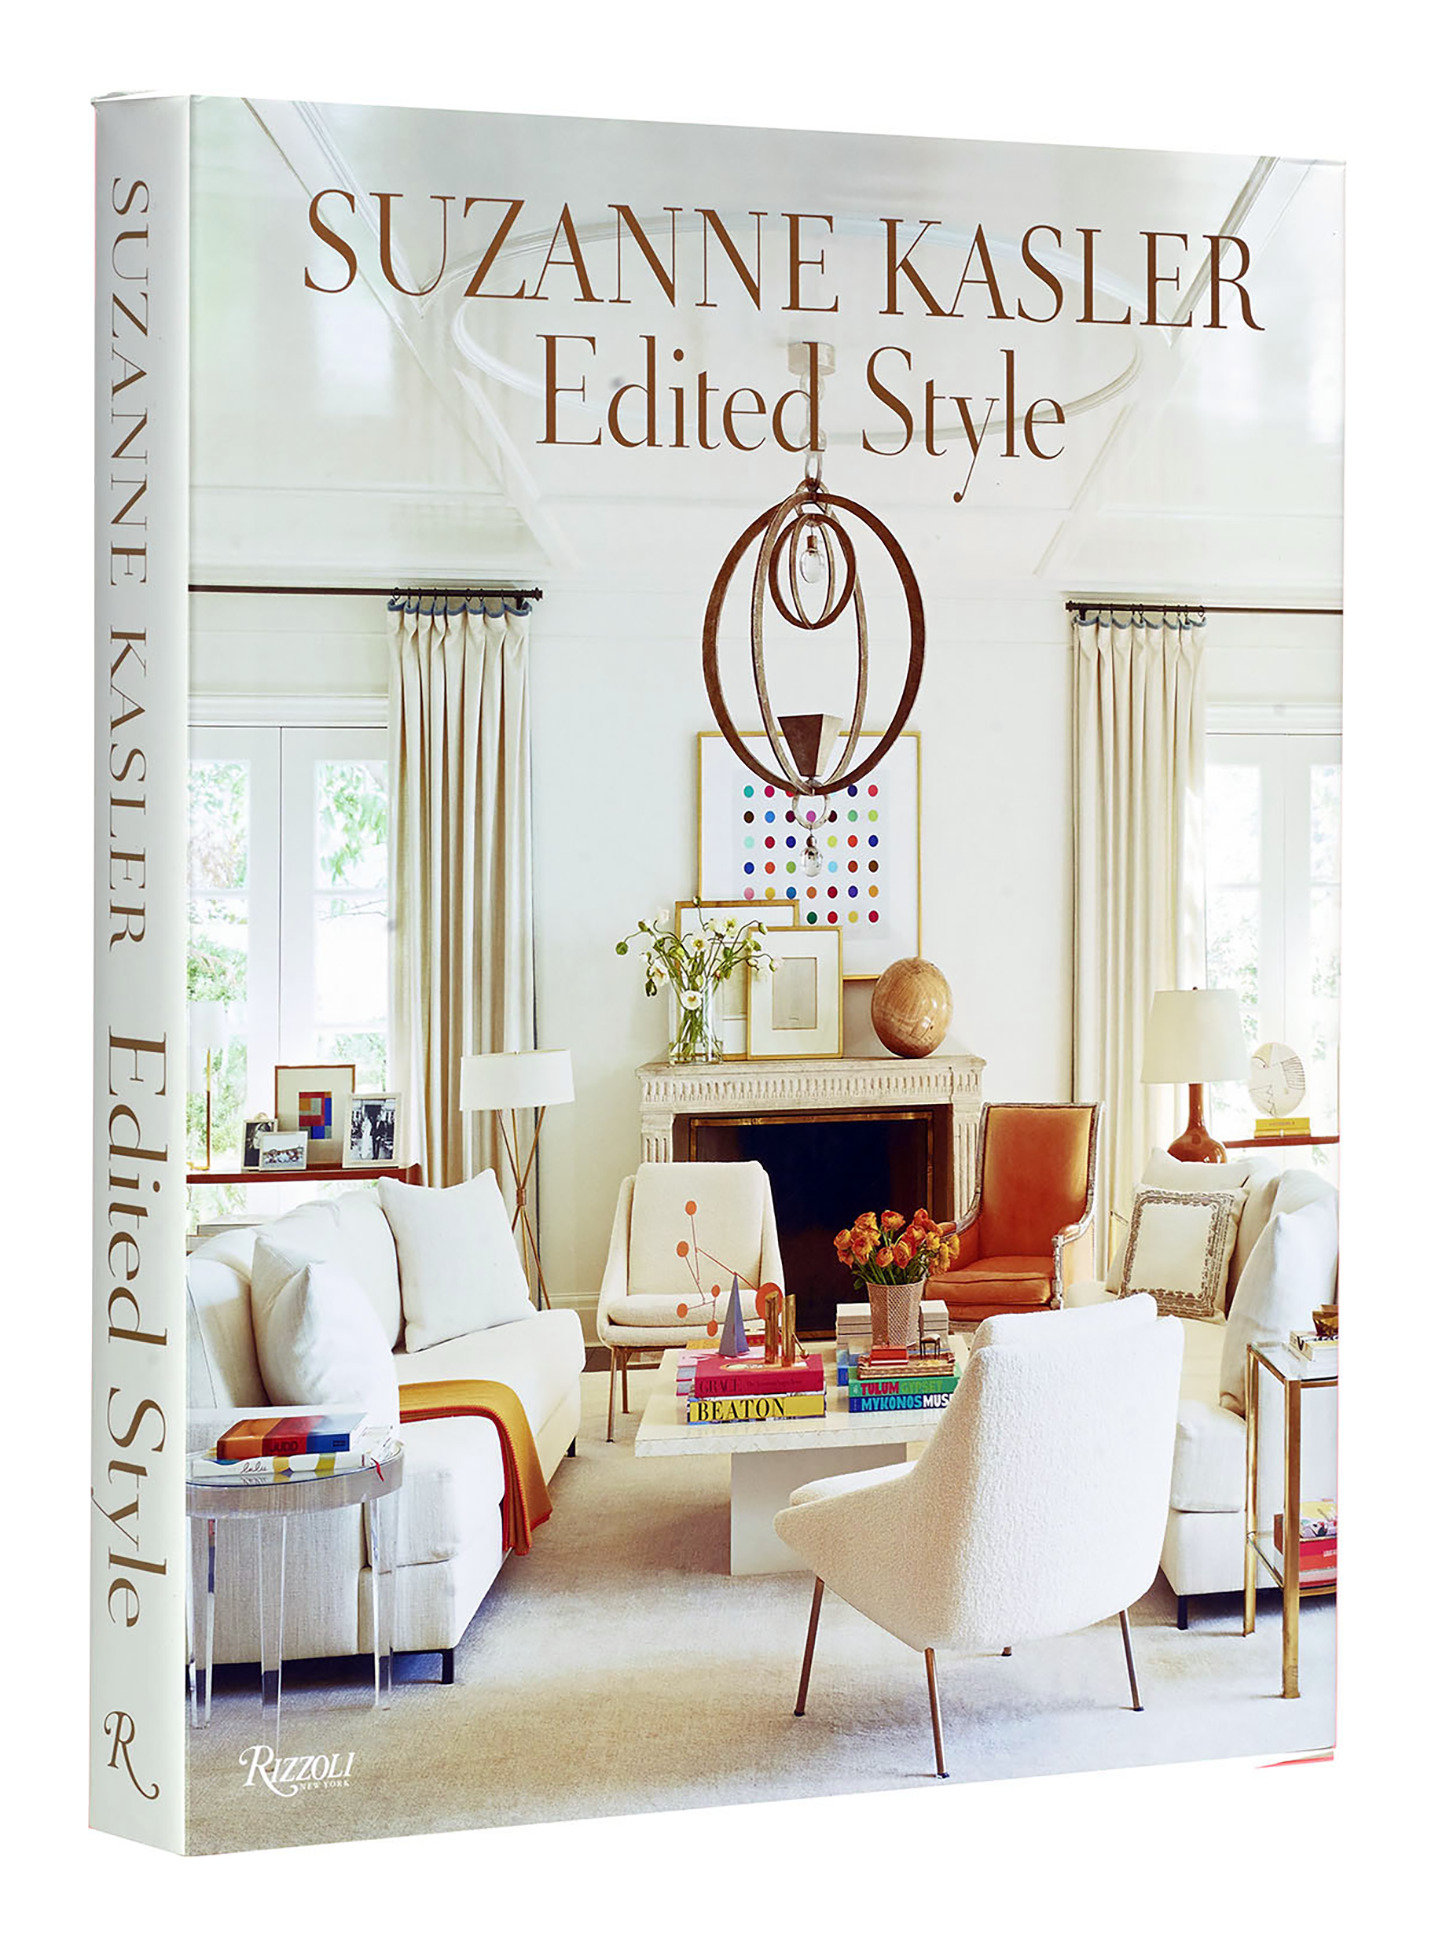 Suzanne Kasler: Edited Style (Hardcover Book)